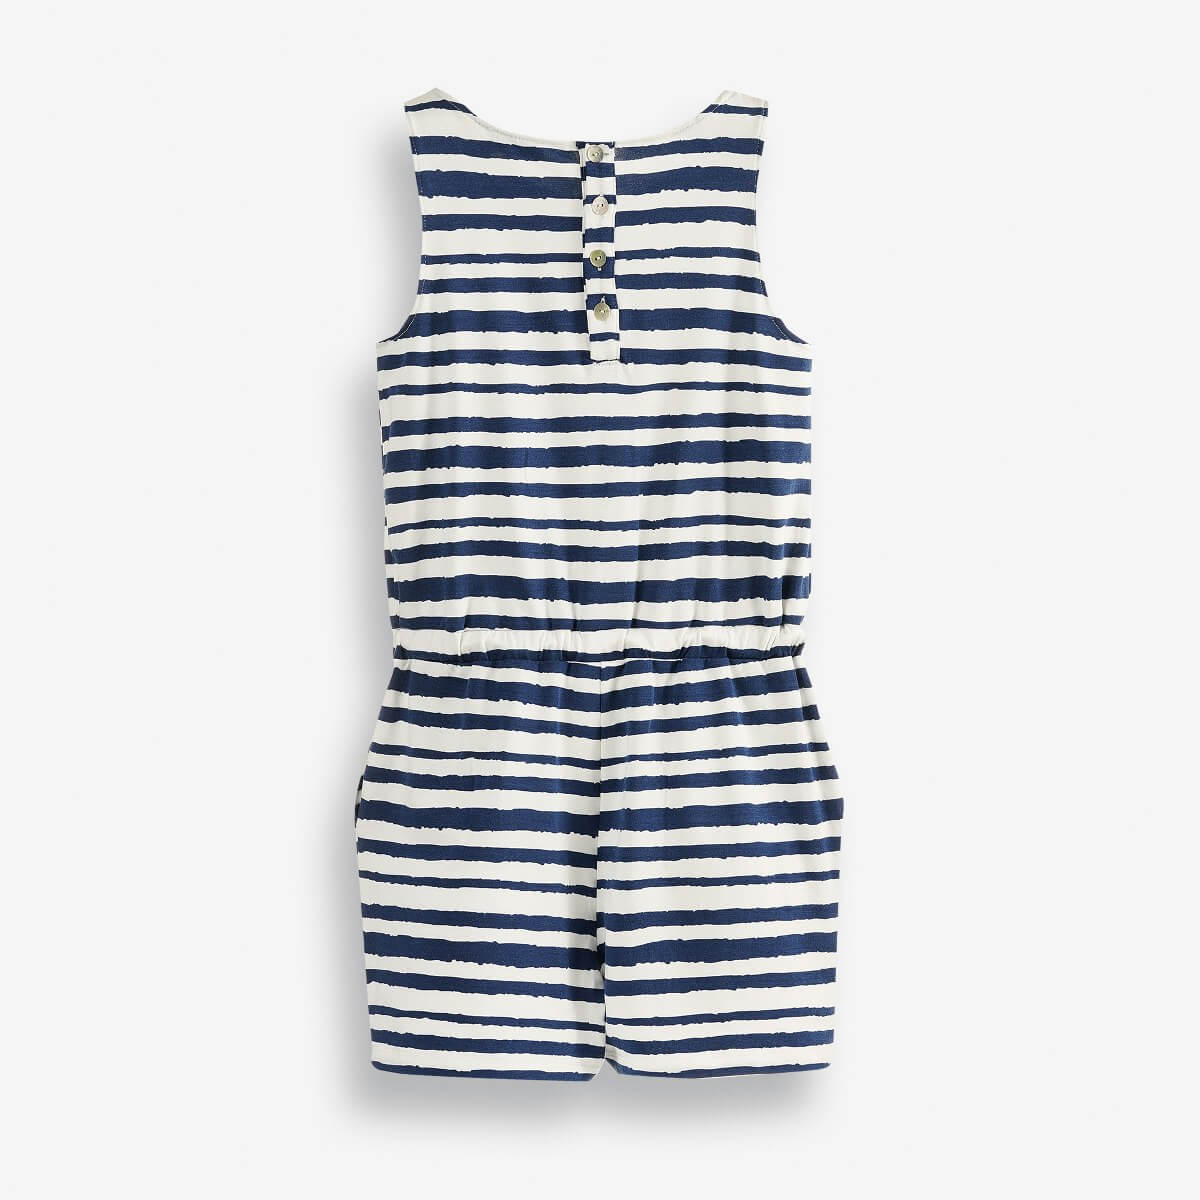 Sleeveless Girls' Jumpsuit With White and Blue Horizontal Stripes